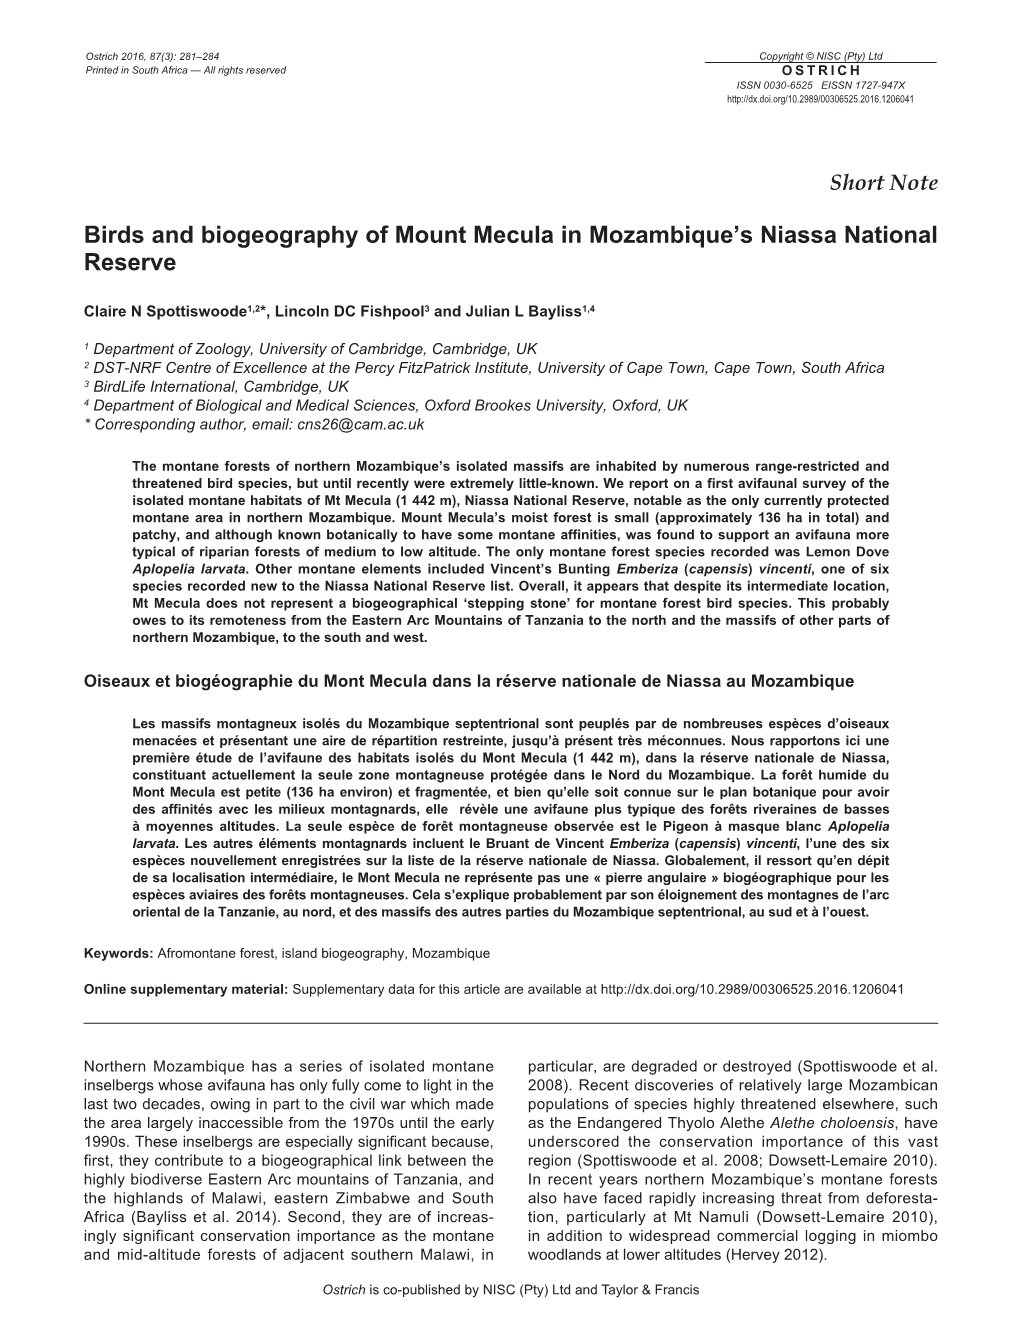 Birds and Biogeography of Mount Mecula in Mozambique's Niassa